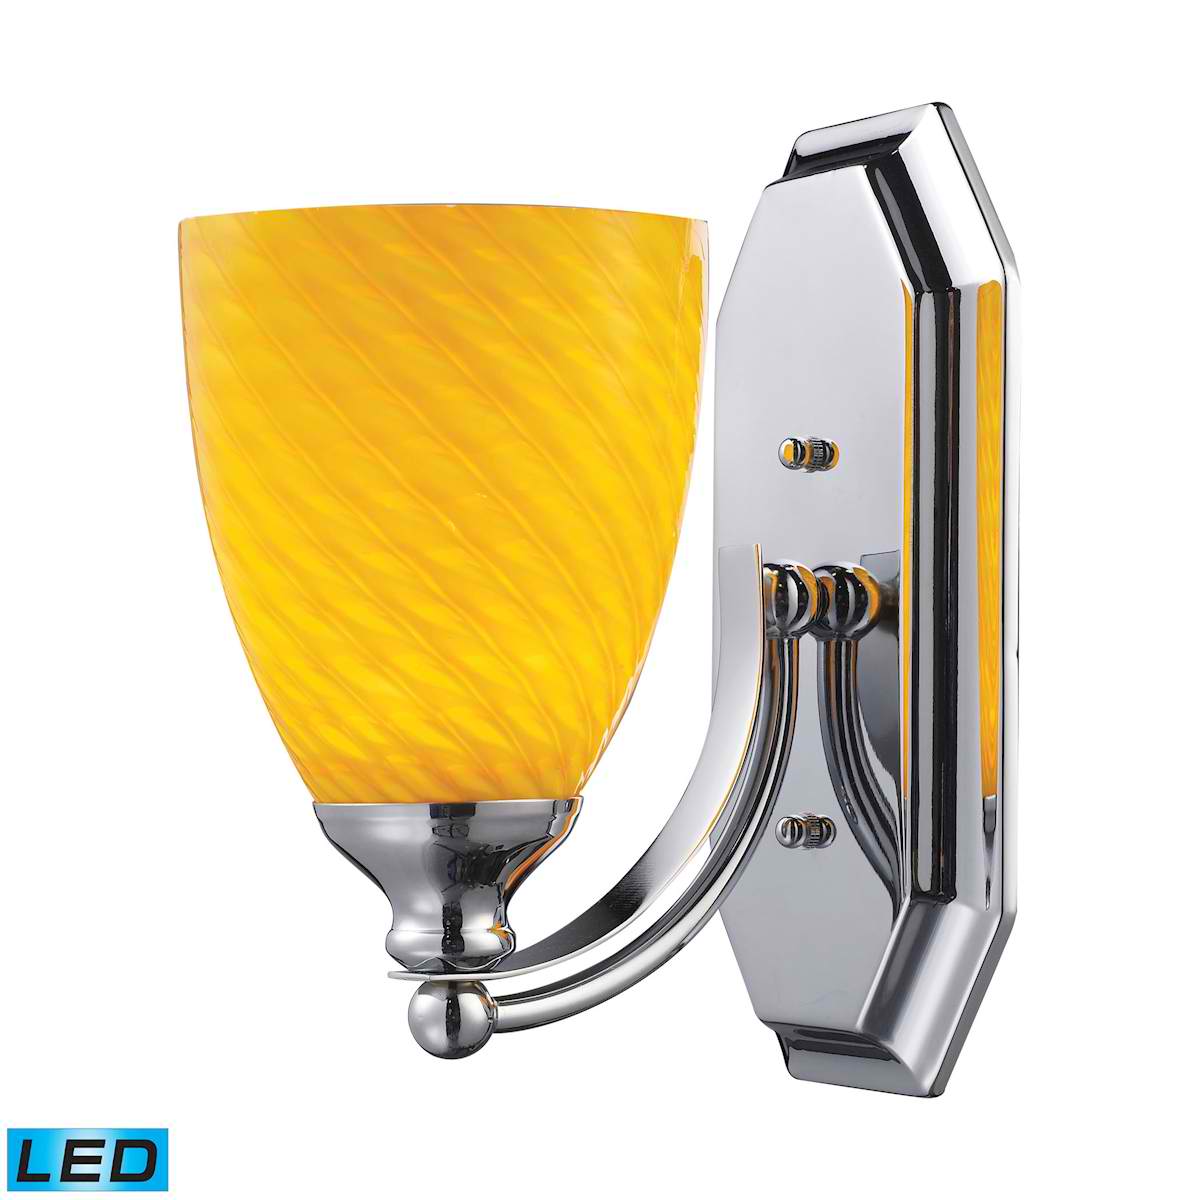 1 Light Vanity in Polished Chrome and Canary Glass - LED Offering Up To 800 Lumens (60 Watt Equivalent)